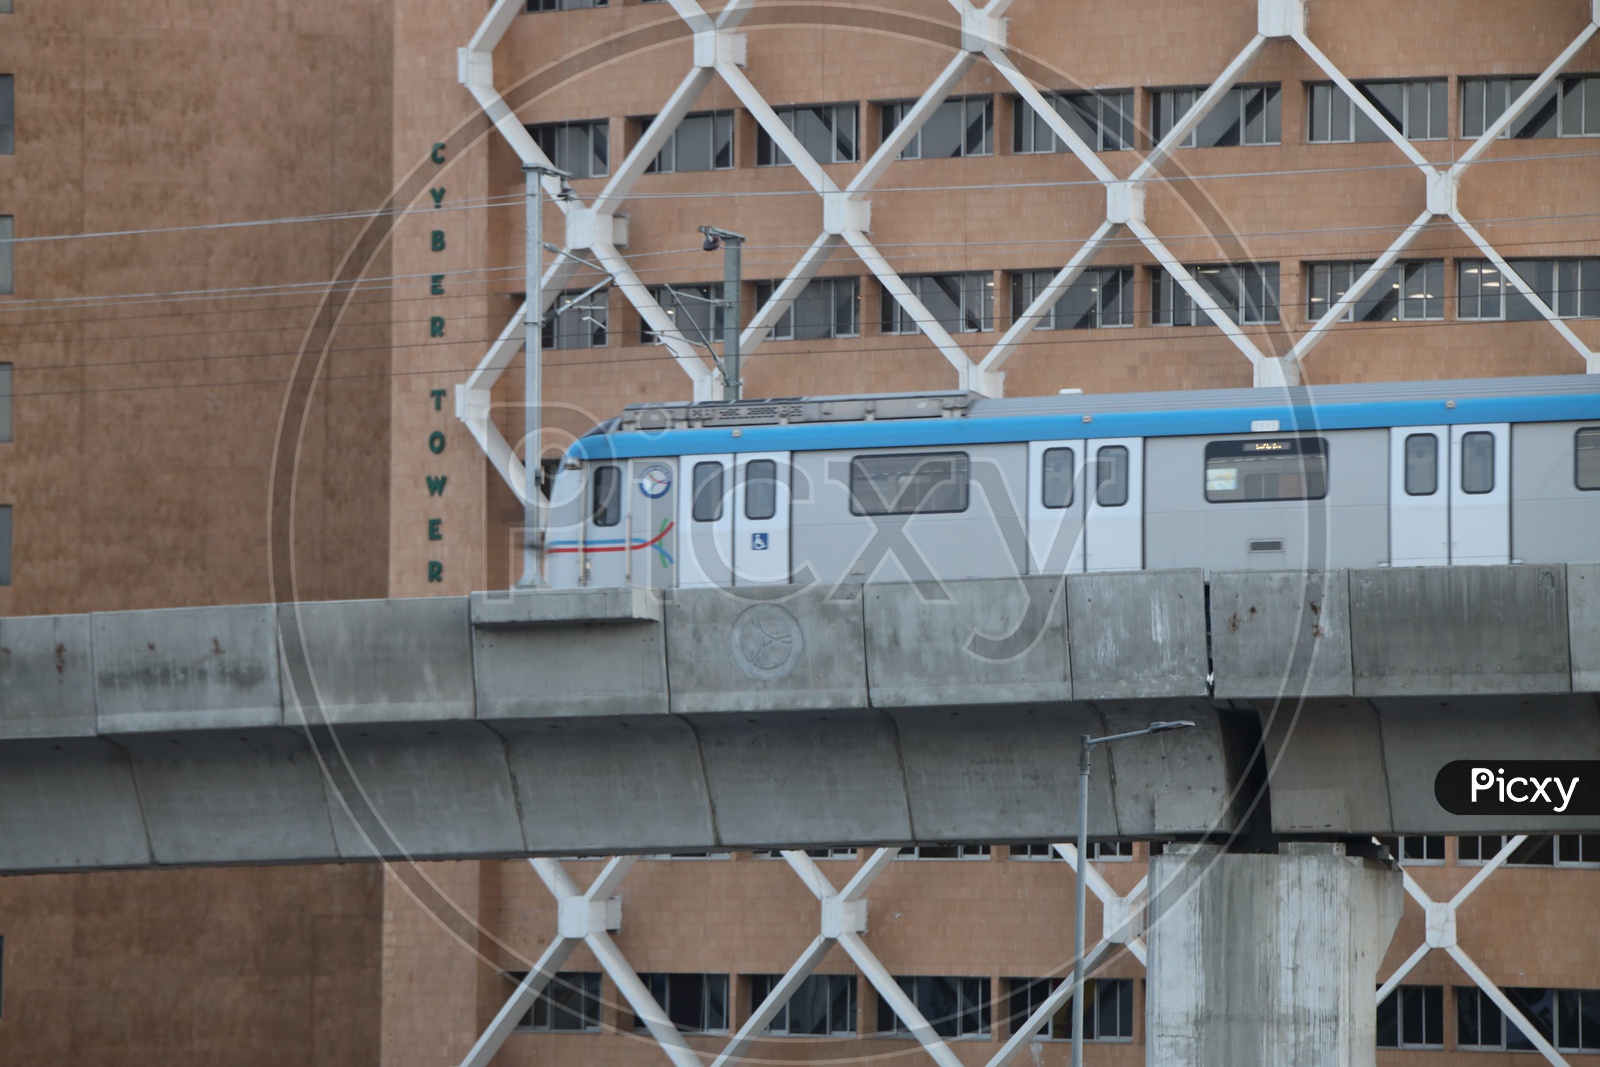 Hyderabad Metro Train Running on Track Line With Cyber Towers in Background